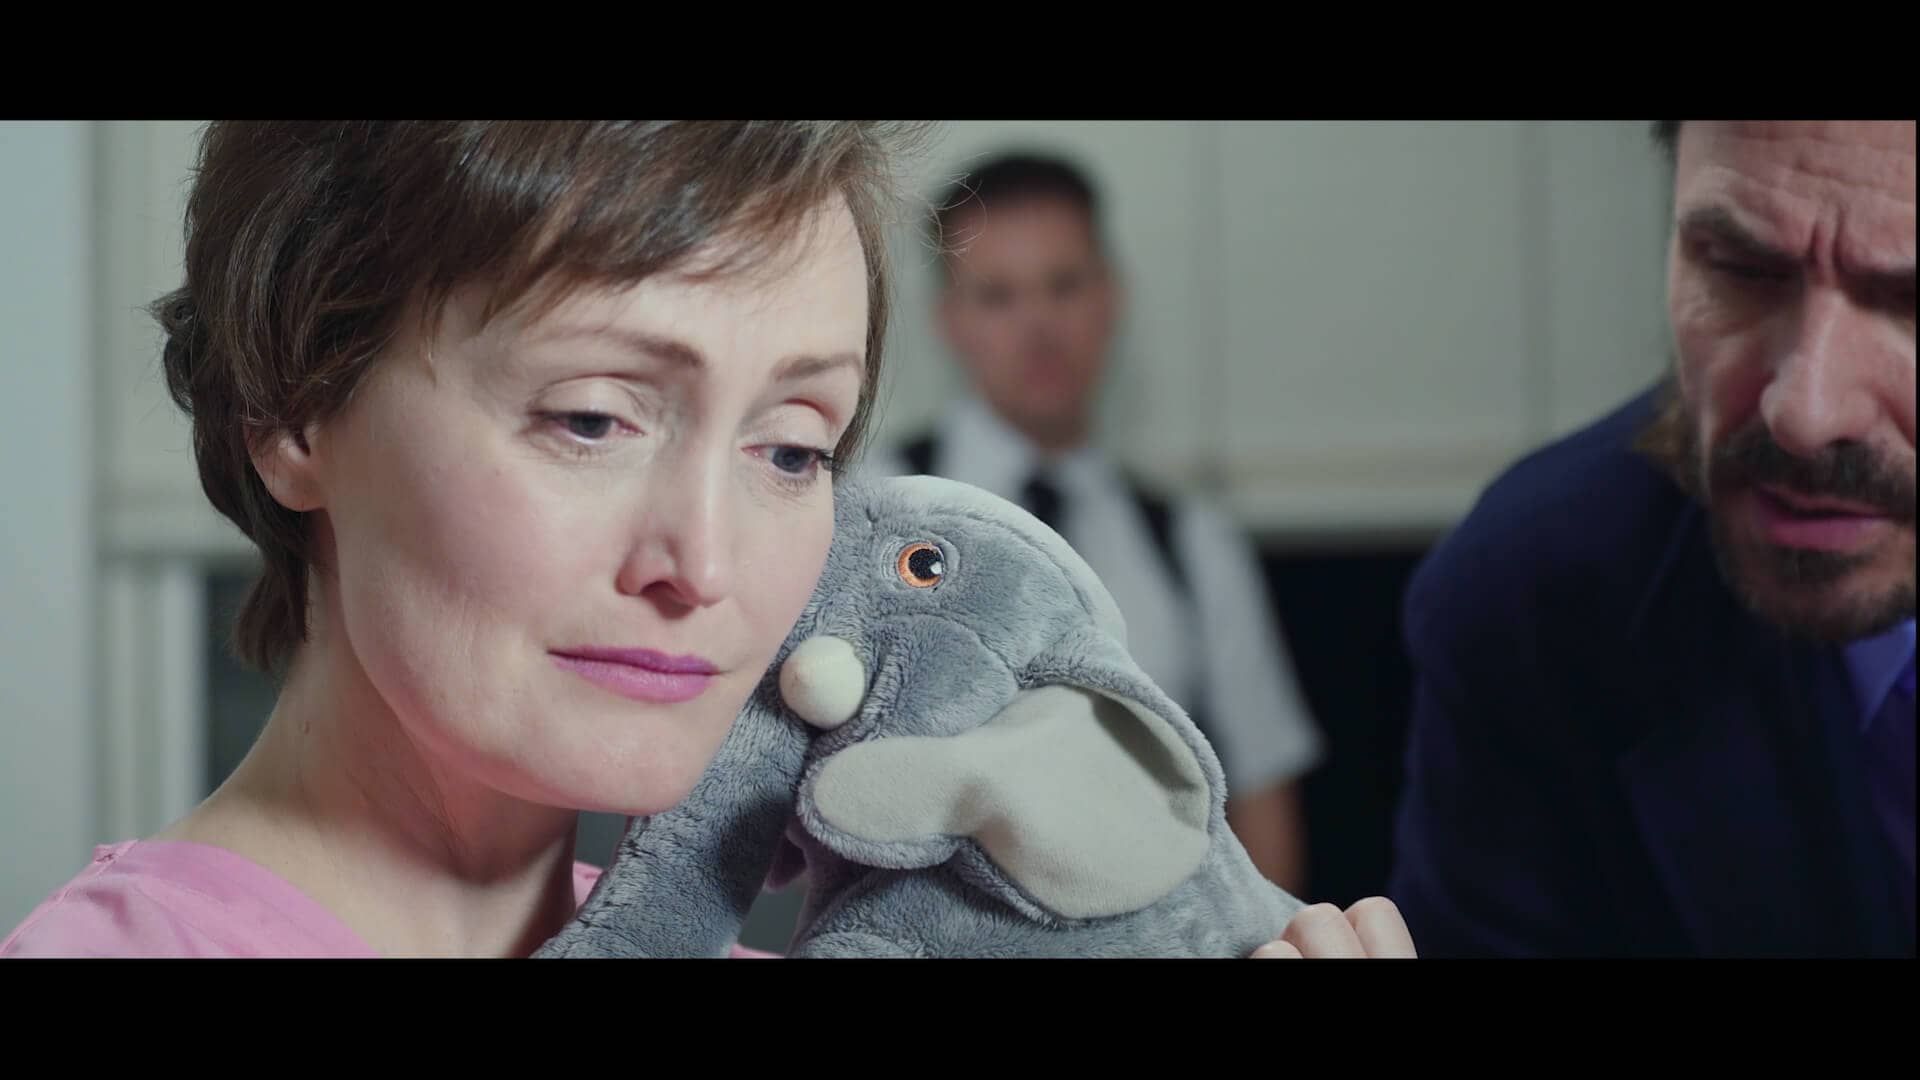 Still from Missing Kitty. Julie-Anne holds a stuffed animal and looks away, on the verge of tears.